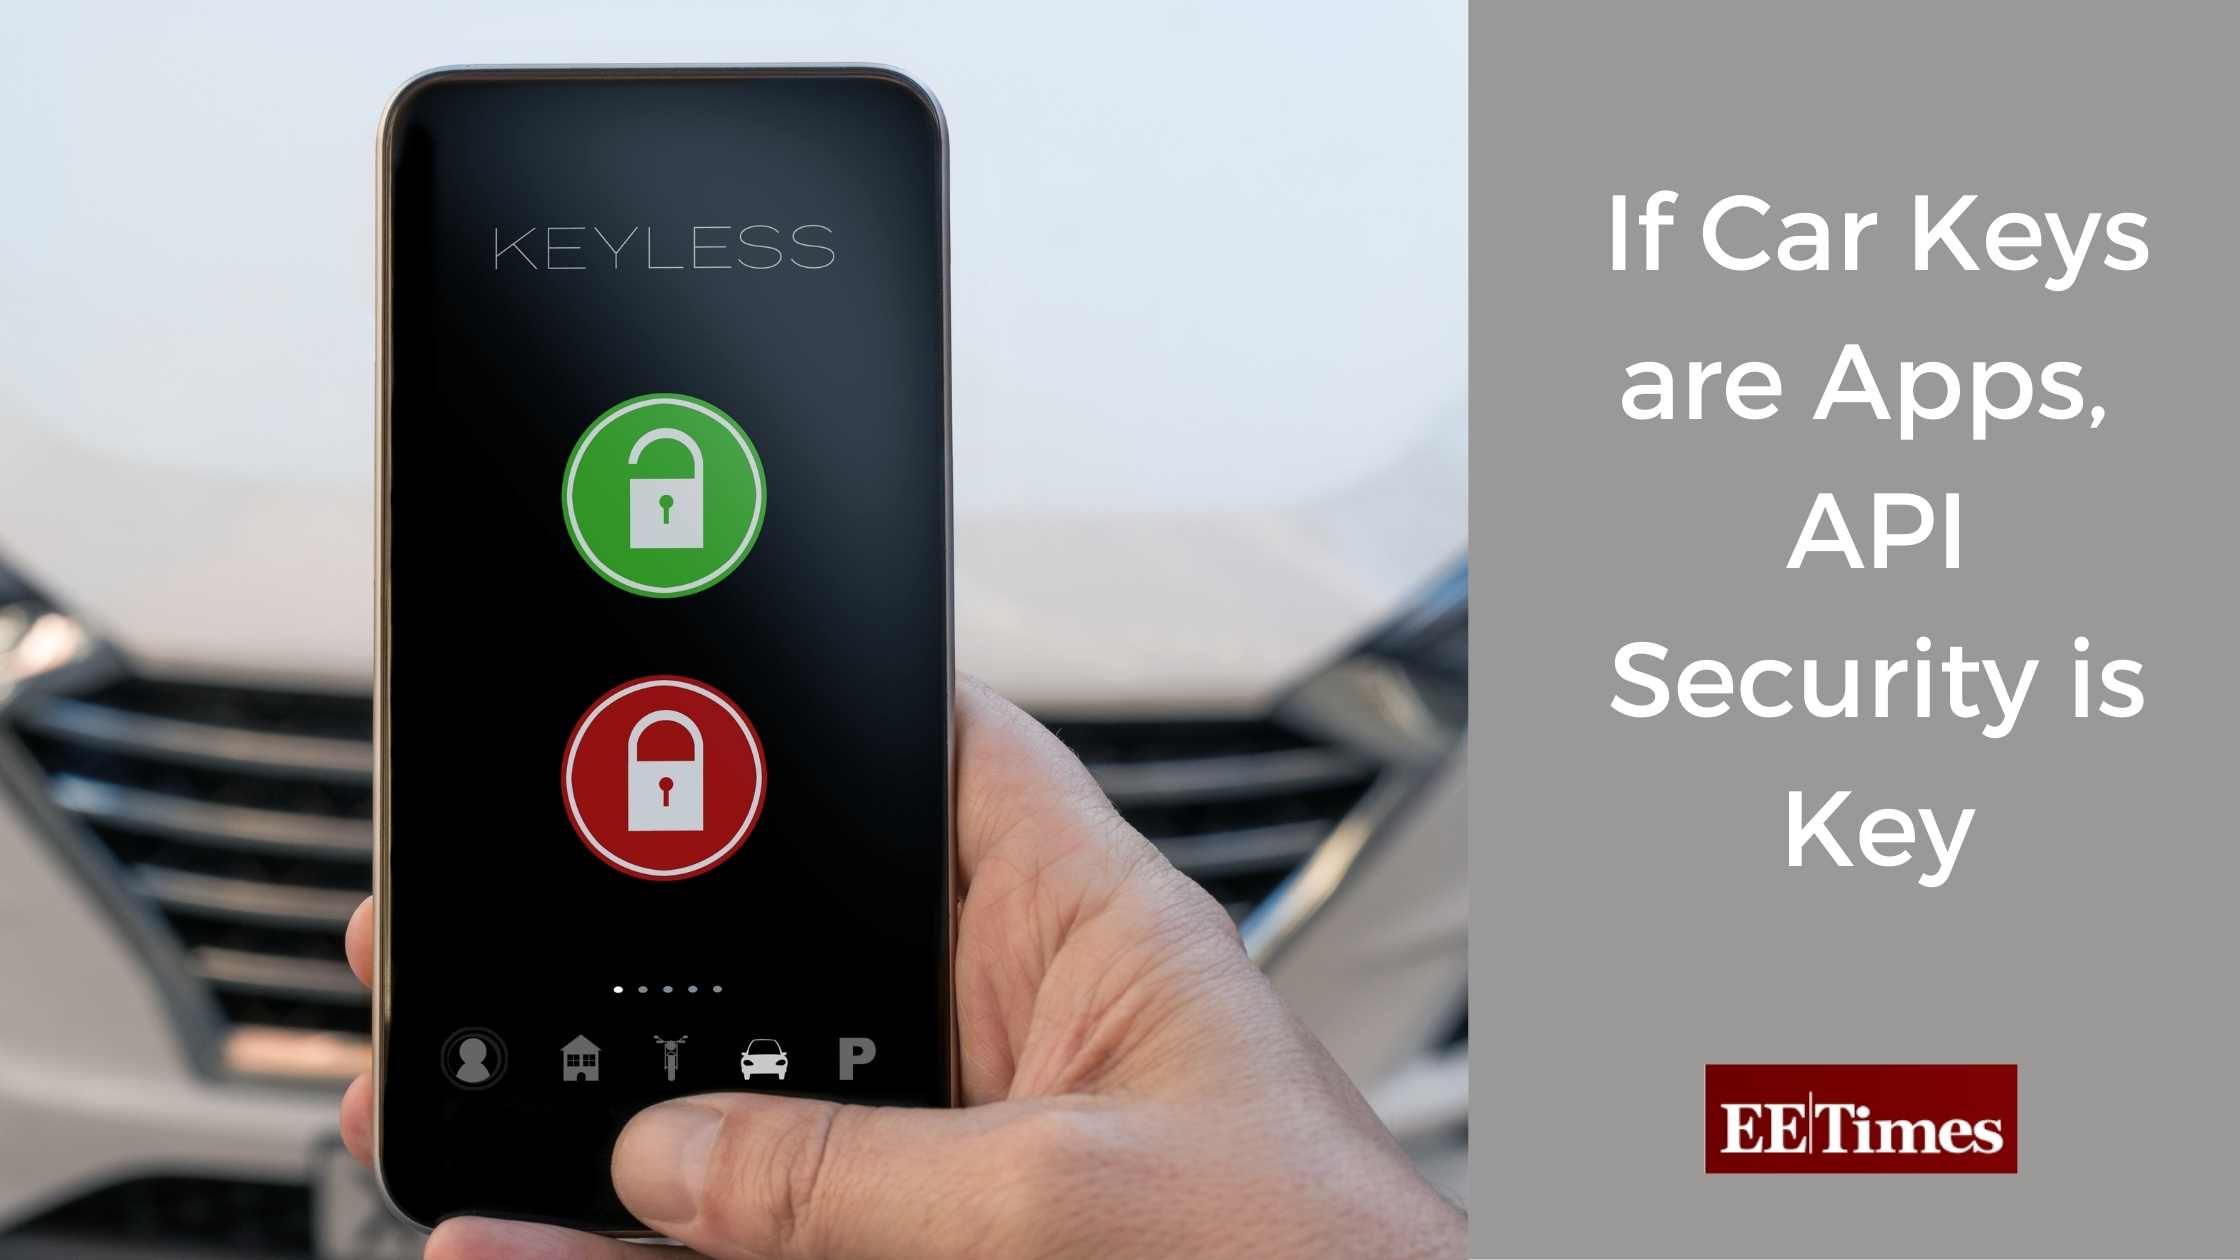 Close up of hand holding a mobile phone with app for keyless car access. Text 'If Car Keys are Apps, API Security is Key' and EETimes logo